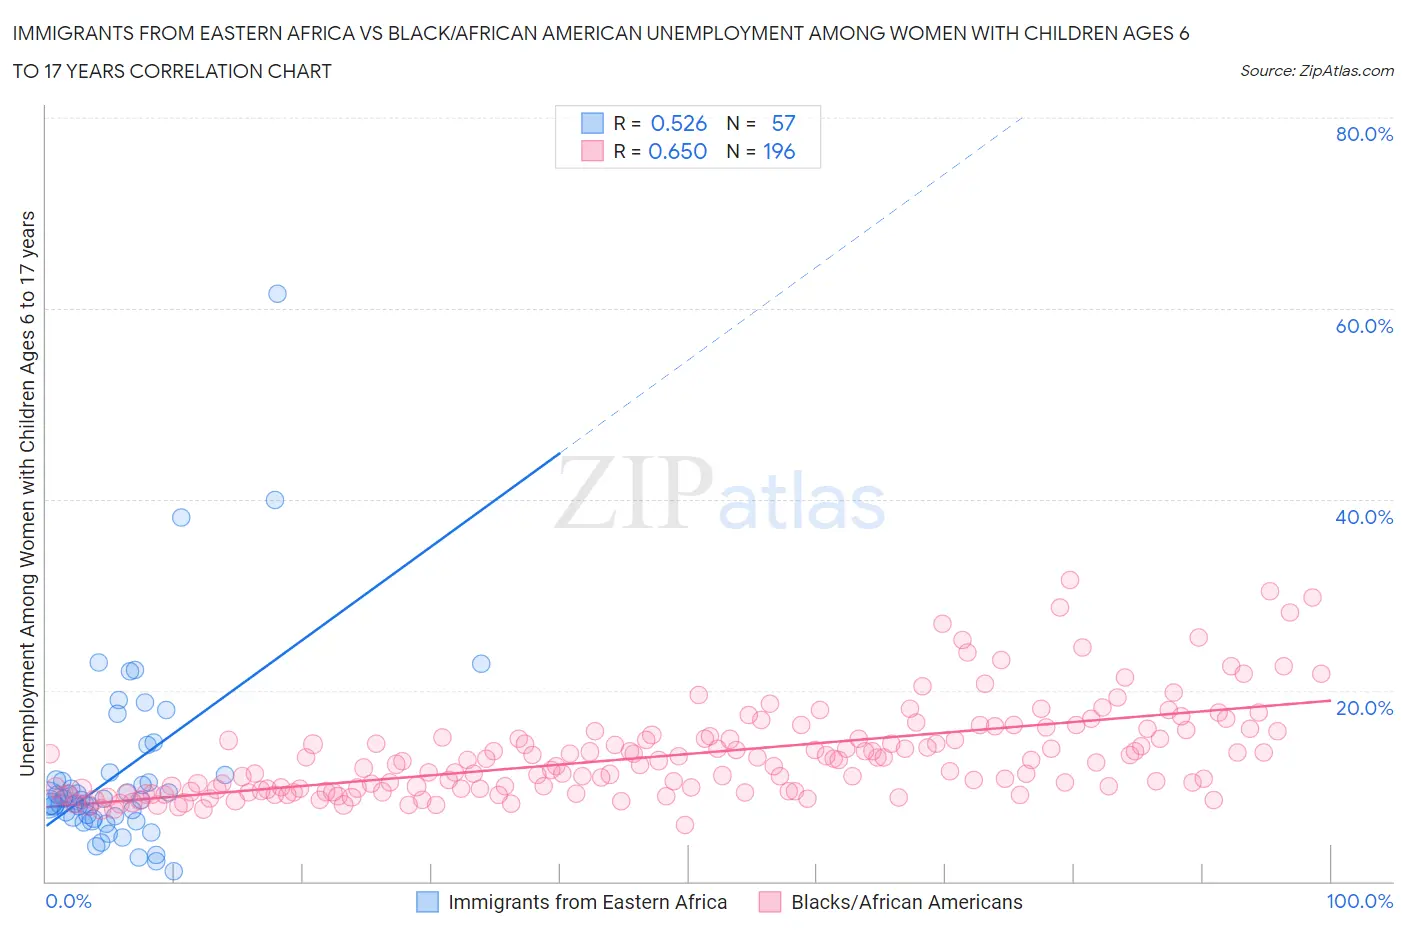 Immigrants from Eastern Africa vs Black/African American Unemployment Among Women with Children Ages 6 to 17 years